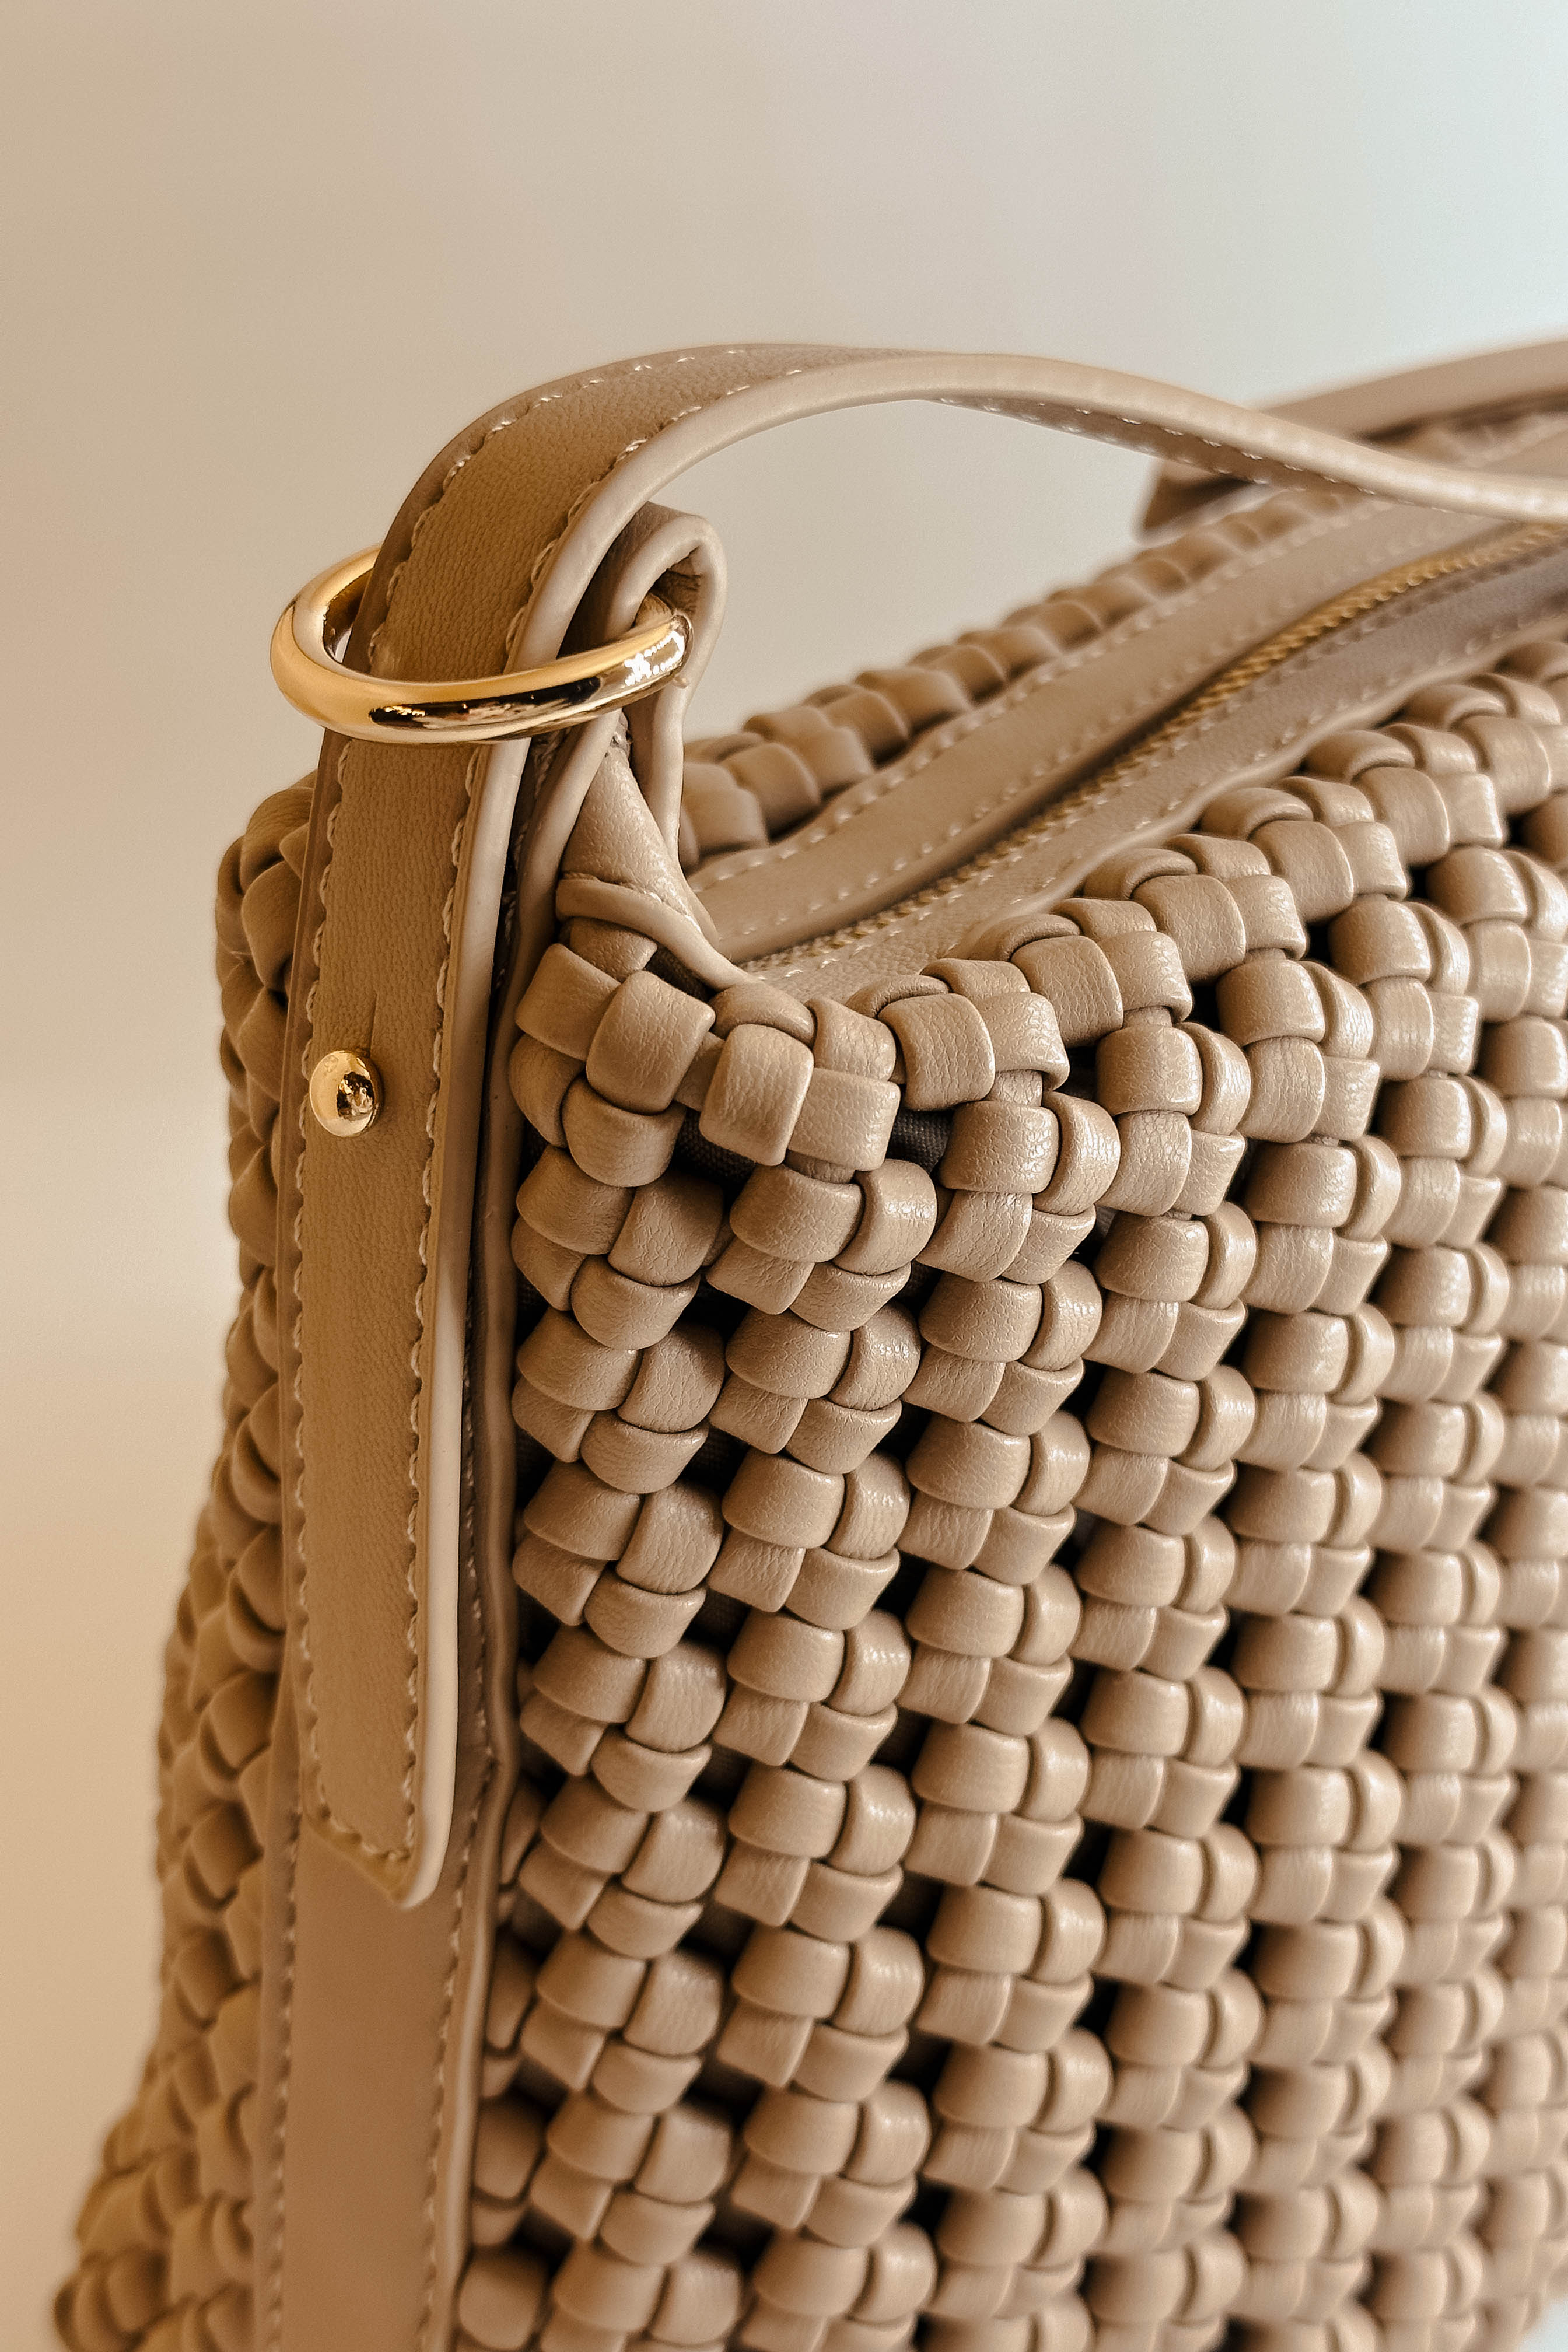 Close detailed side view of the Naya Beige Woven Purse.  It has dark beige faux-leather material with a woven design, short and long removable straps, gold hardware, and a patterned interior with a zippered pocket and a slit pocket.